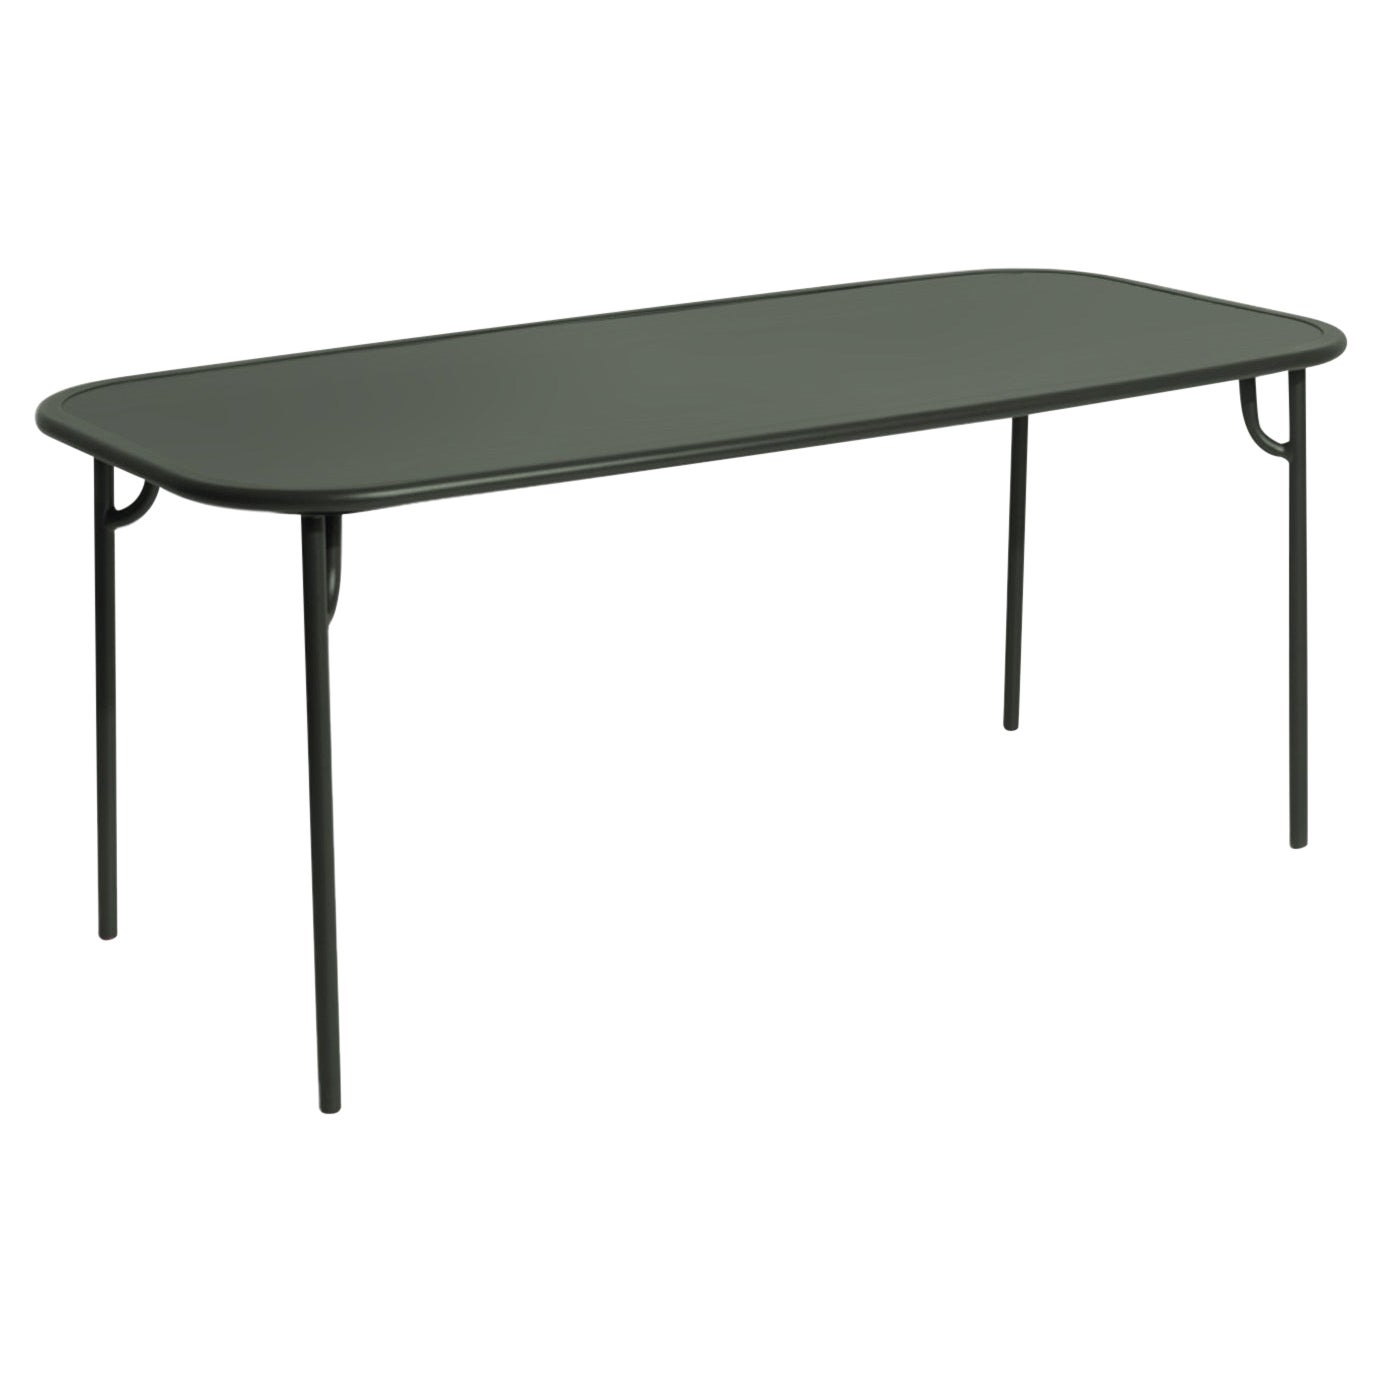 Petite Friture Week-End Medium Plain Rectangular Dining Table in Glass Green For Sale